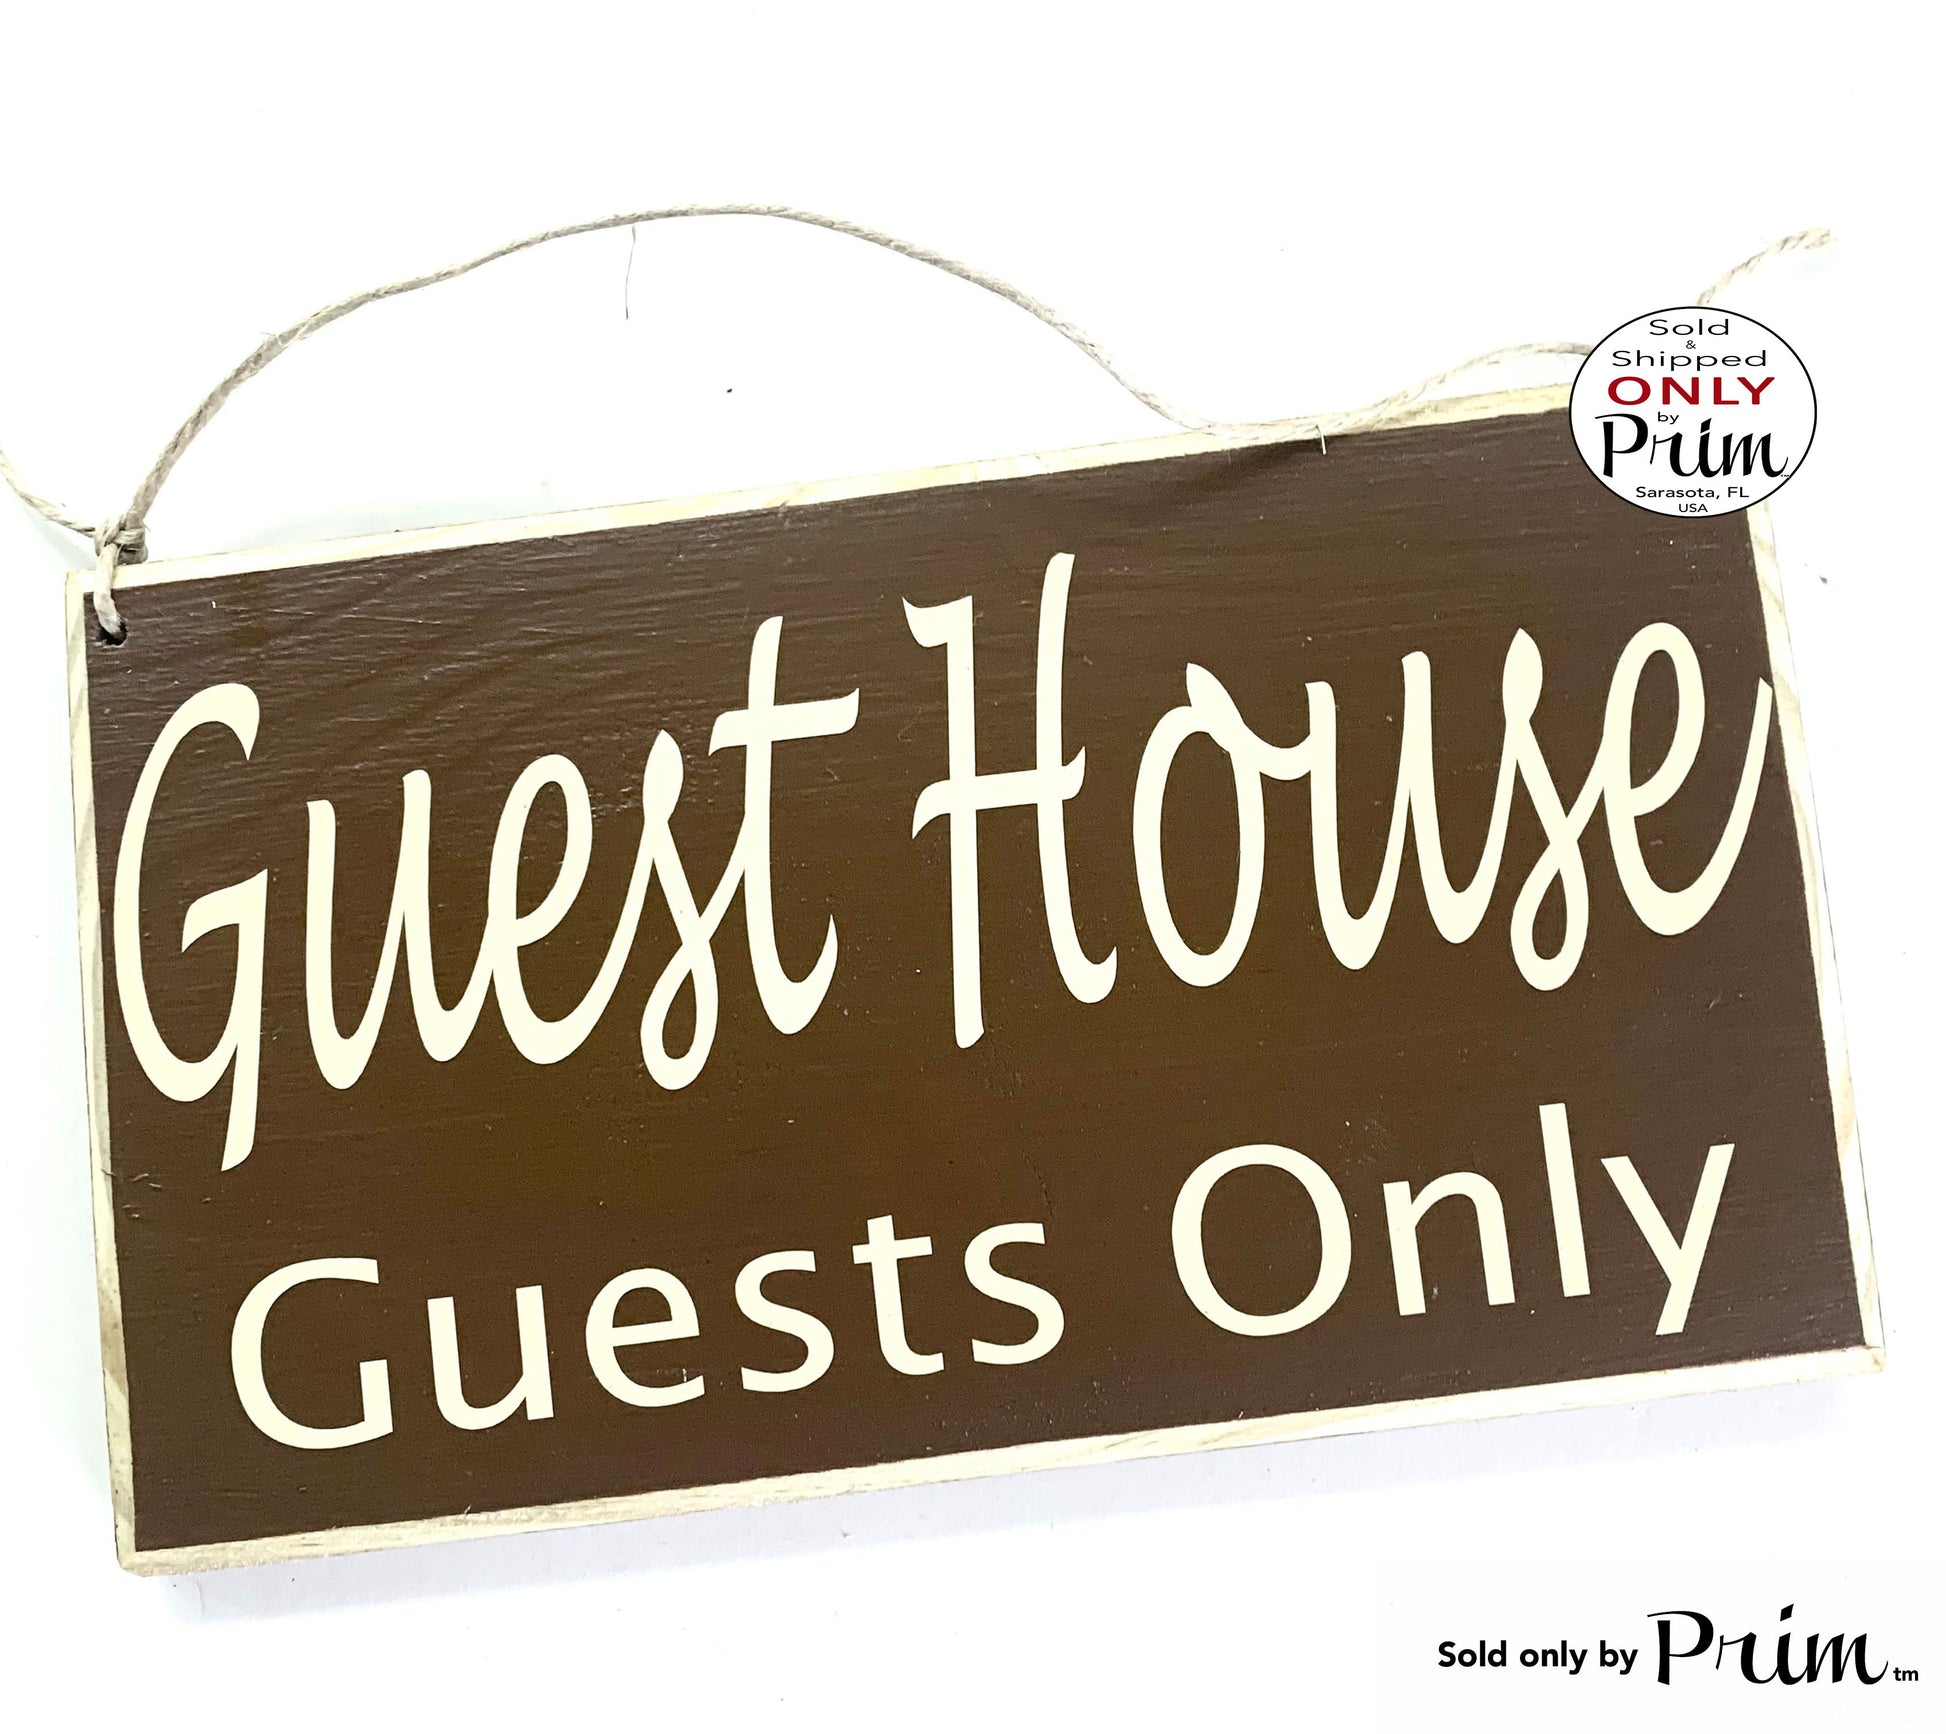 10x6 Guest House Guests Only Custom Wood Sign Suite Quarters Entrance Cottage Bed and Breakfast AirBnb Welcome Wall Door Hanging Plaque Designs by Prim